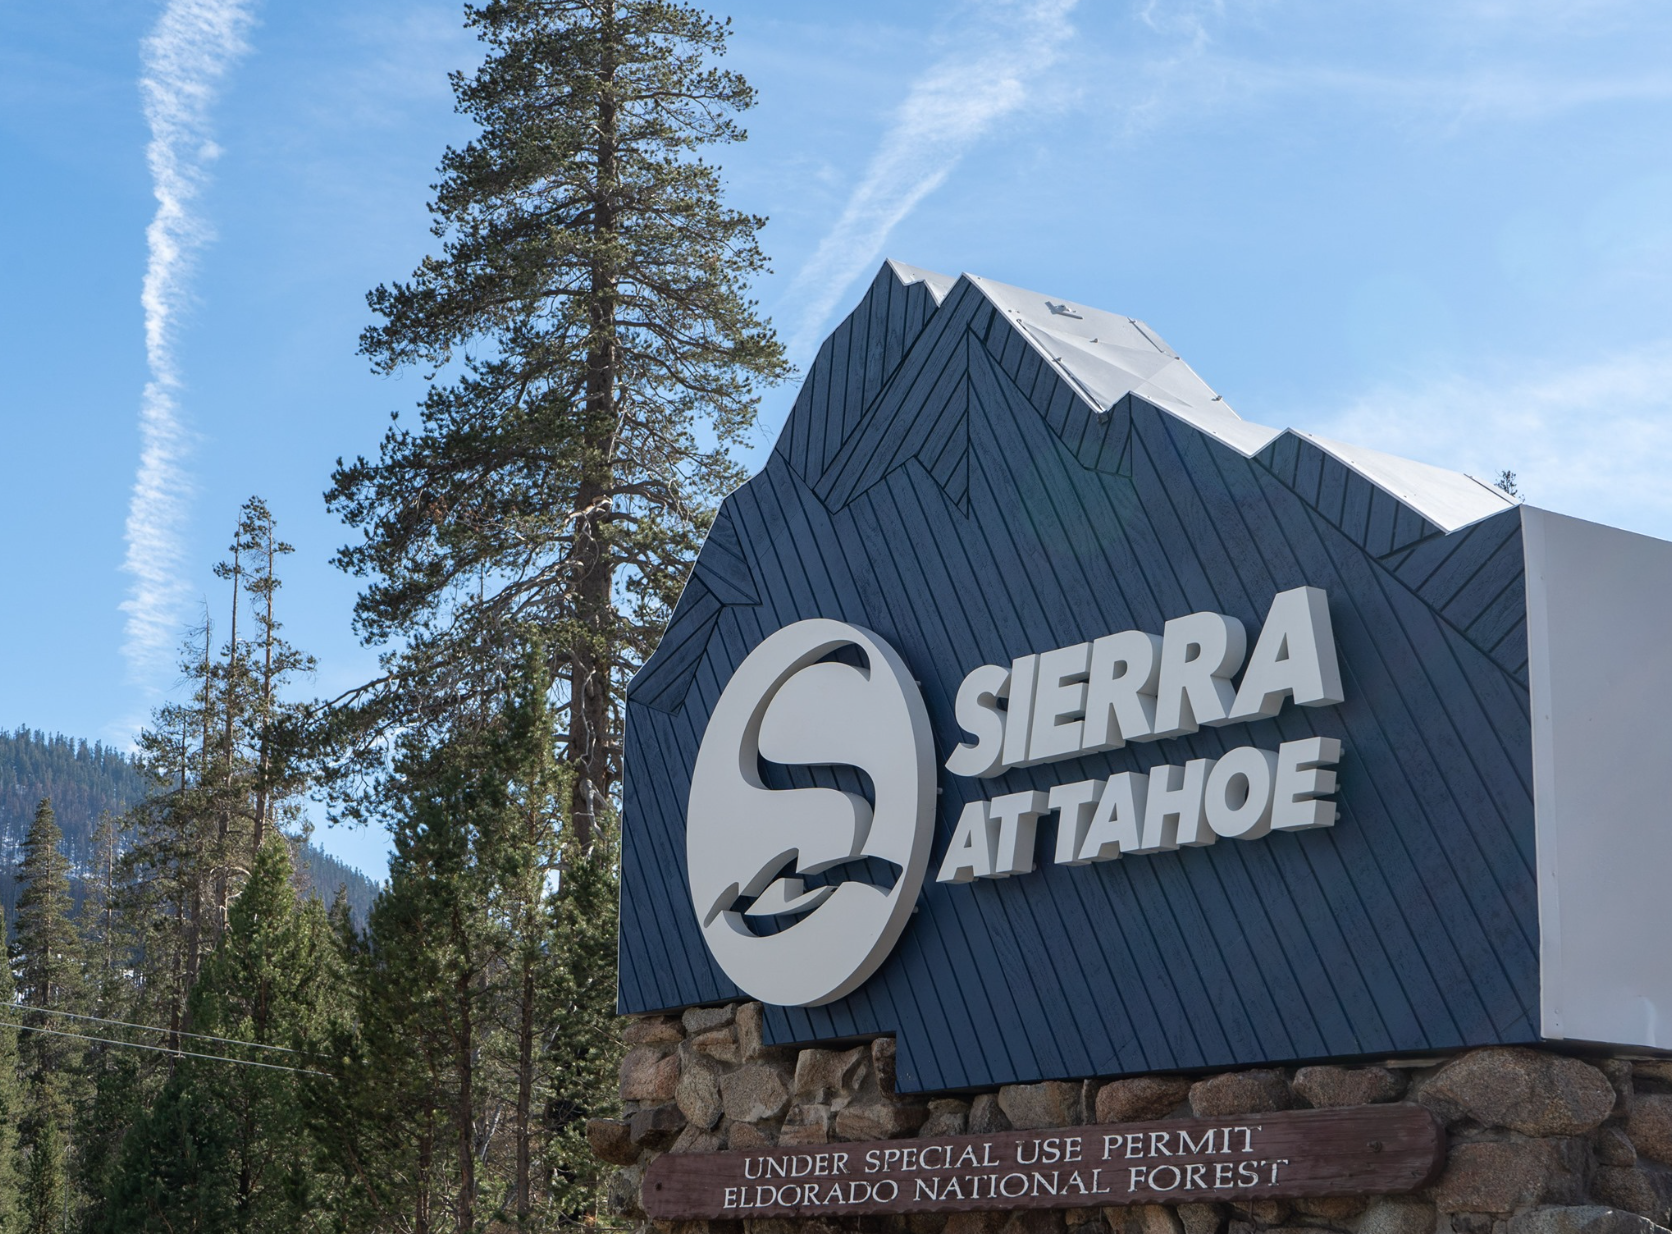 Sierra-at-Tahoe Plans to Fully Reopen Next Winter